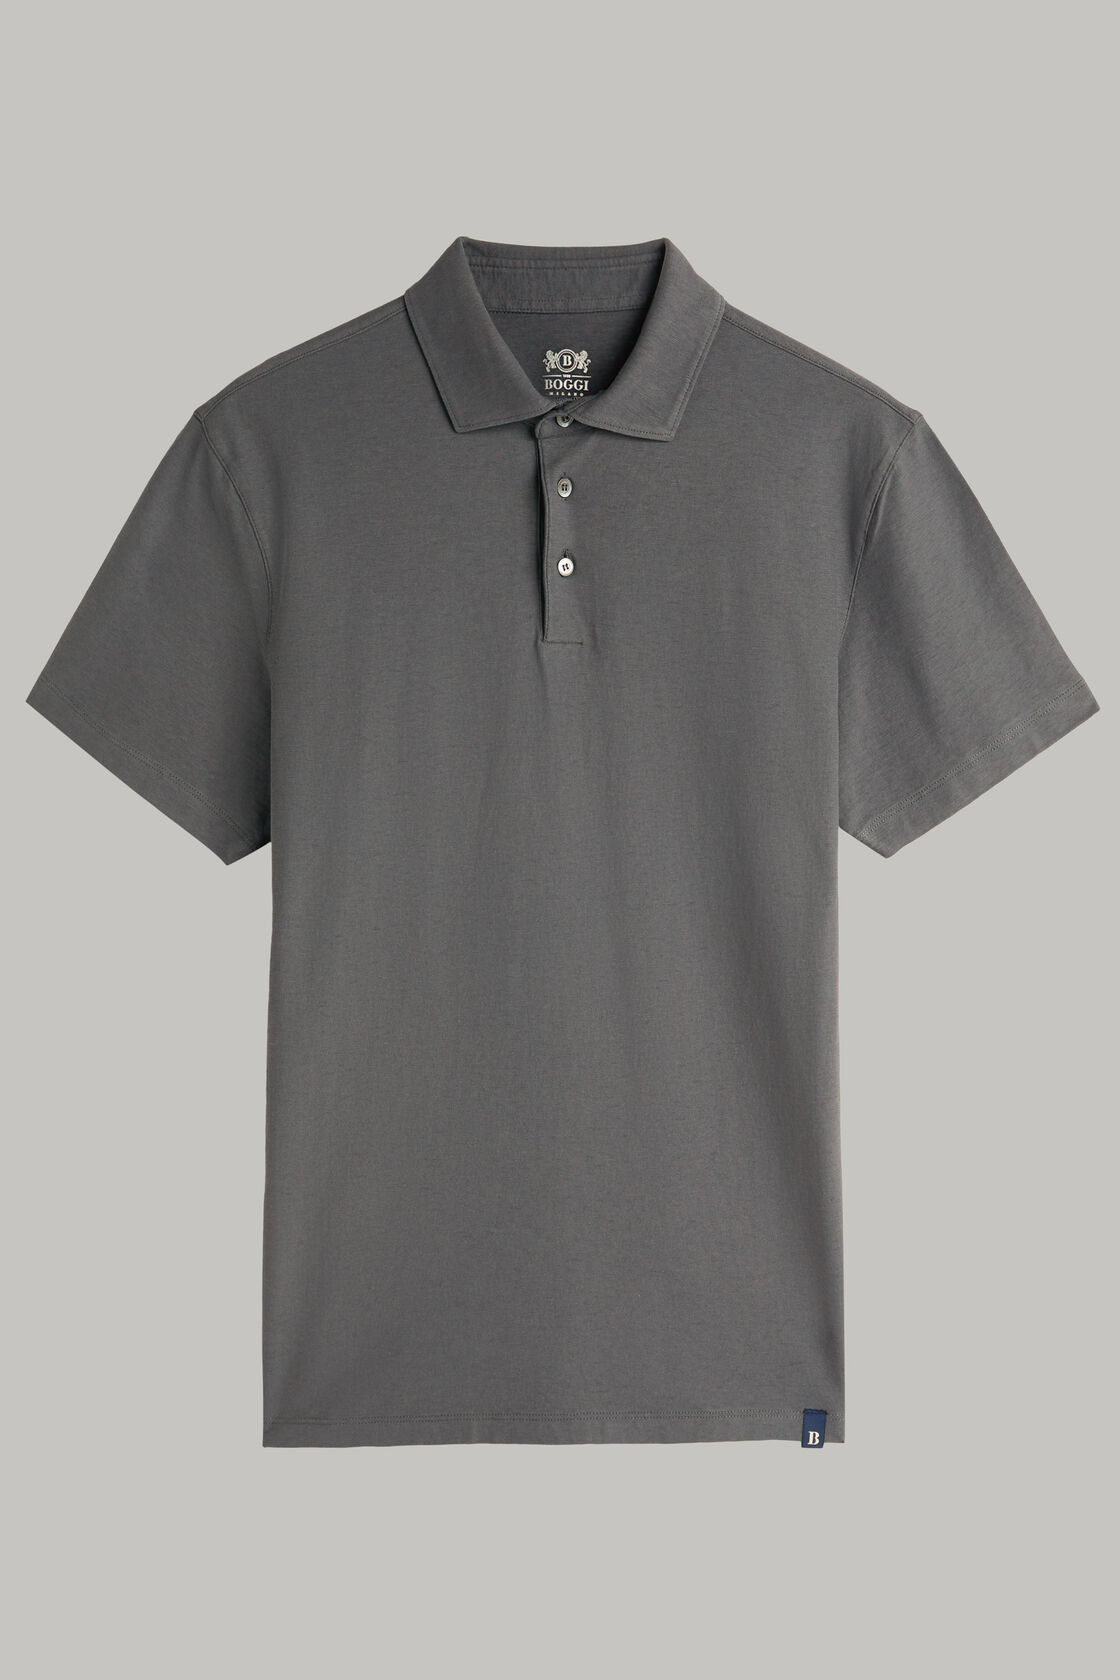 REGULAR FIT POLO SHIRT IN COTTON CREPE JERSEY, , hi-res